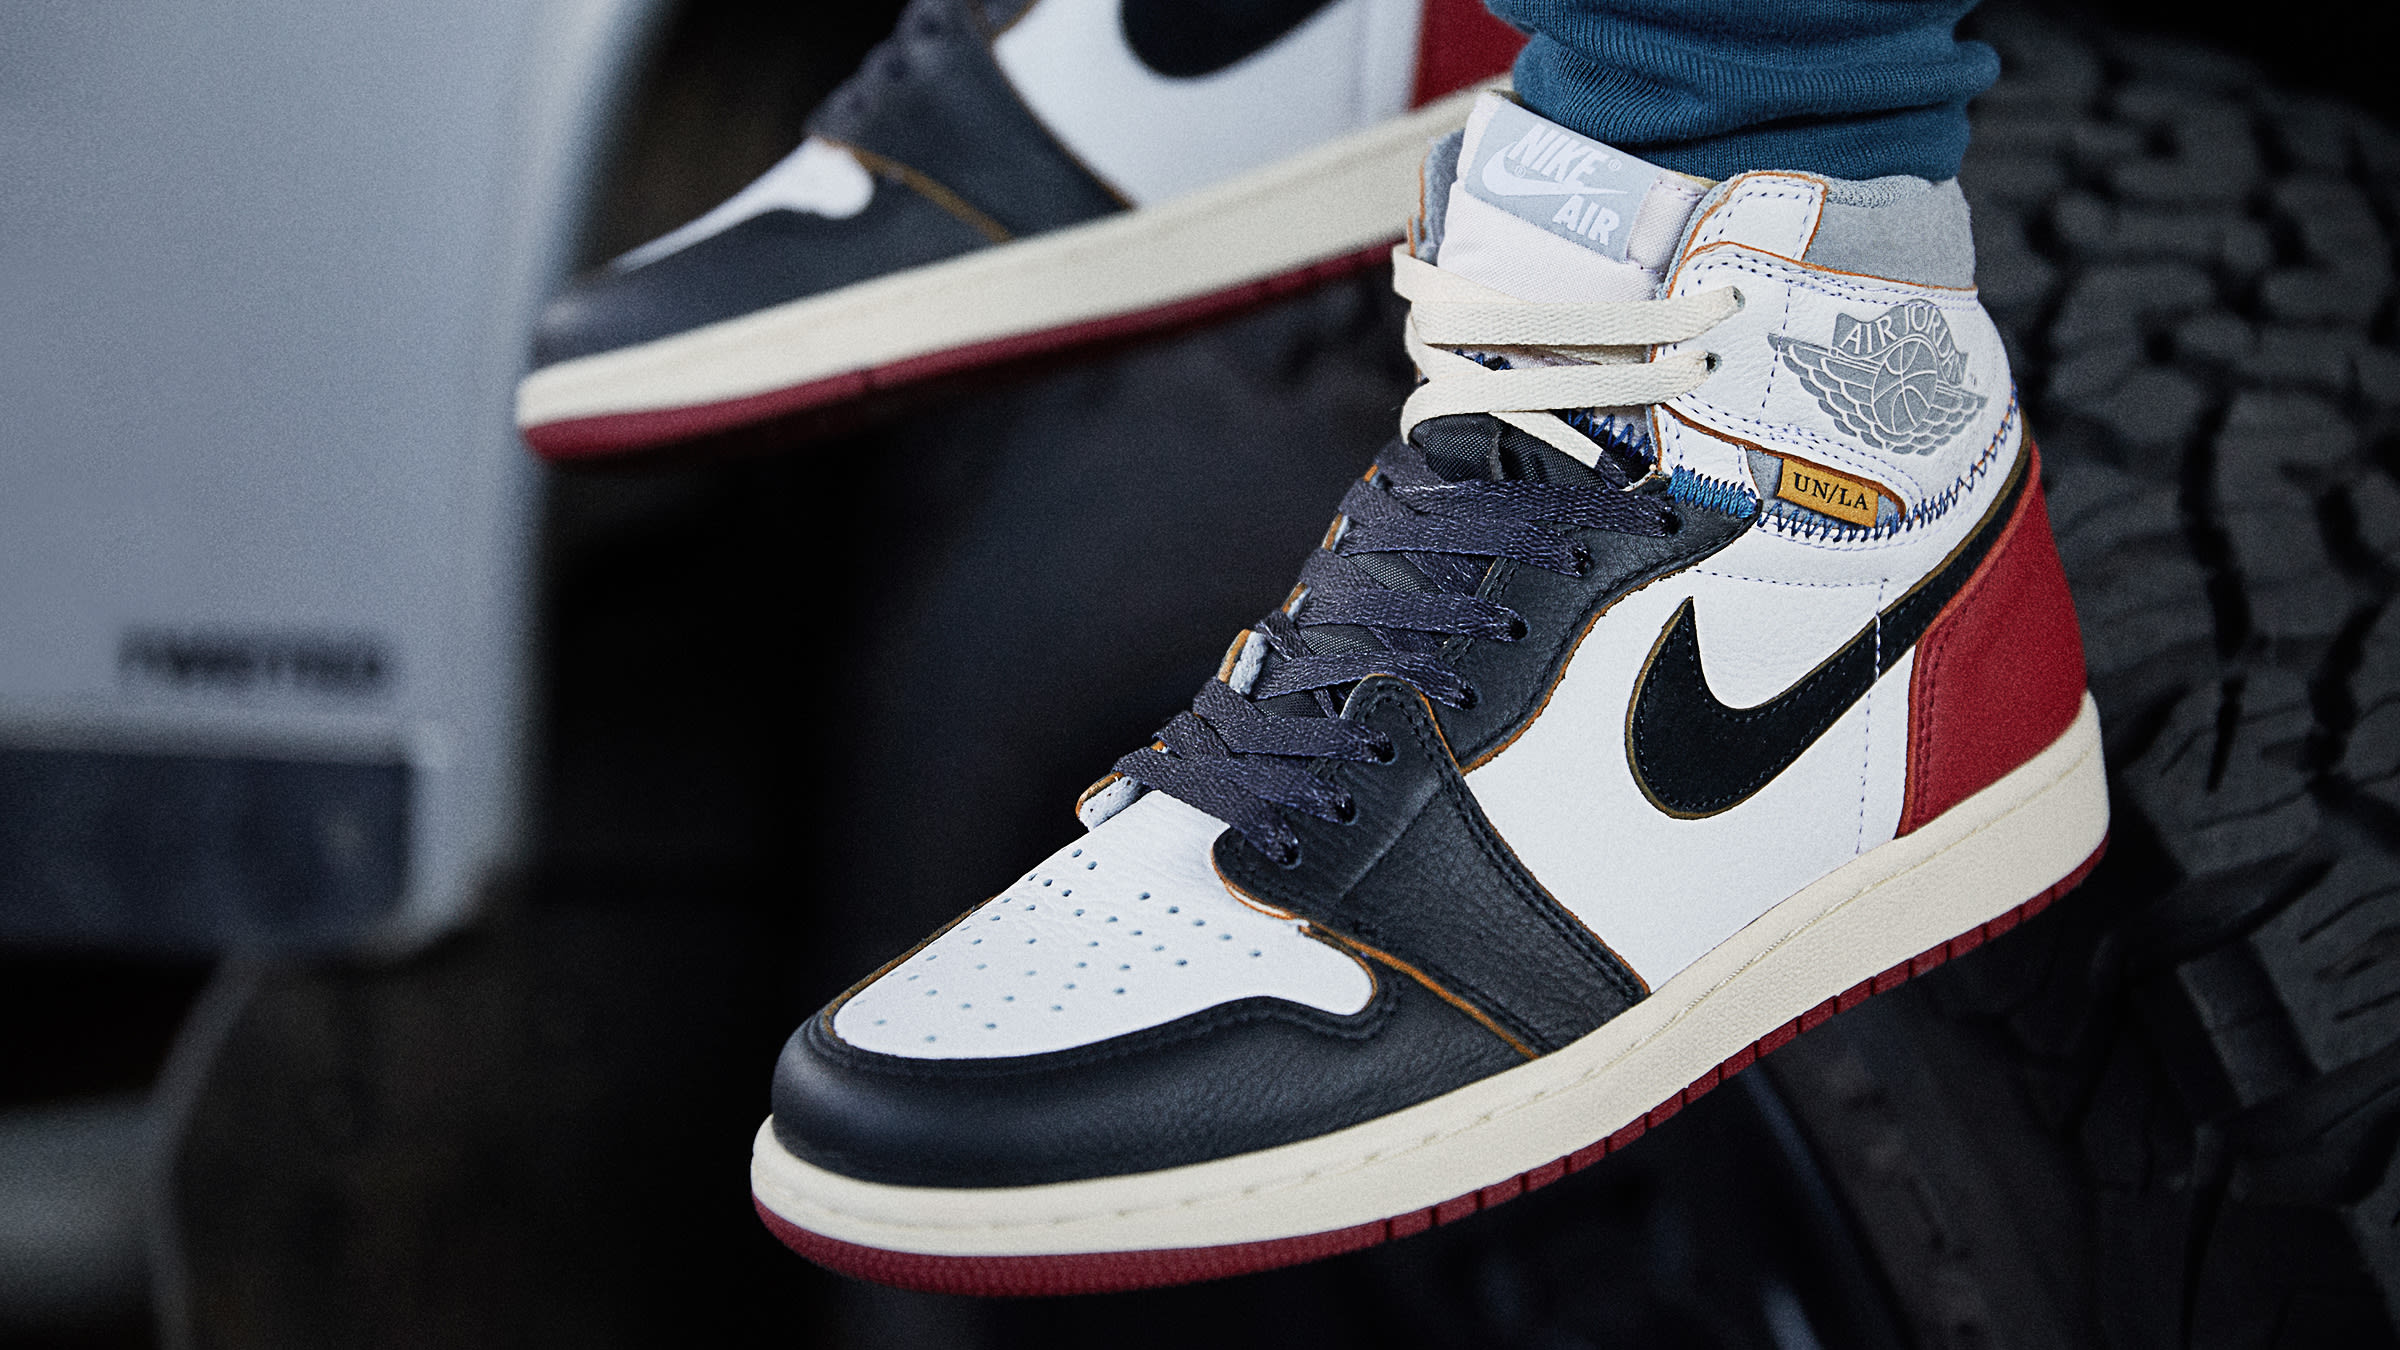 Union X Air Jordan 1 Retro High White Black Red And Grey End Launches